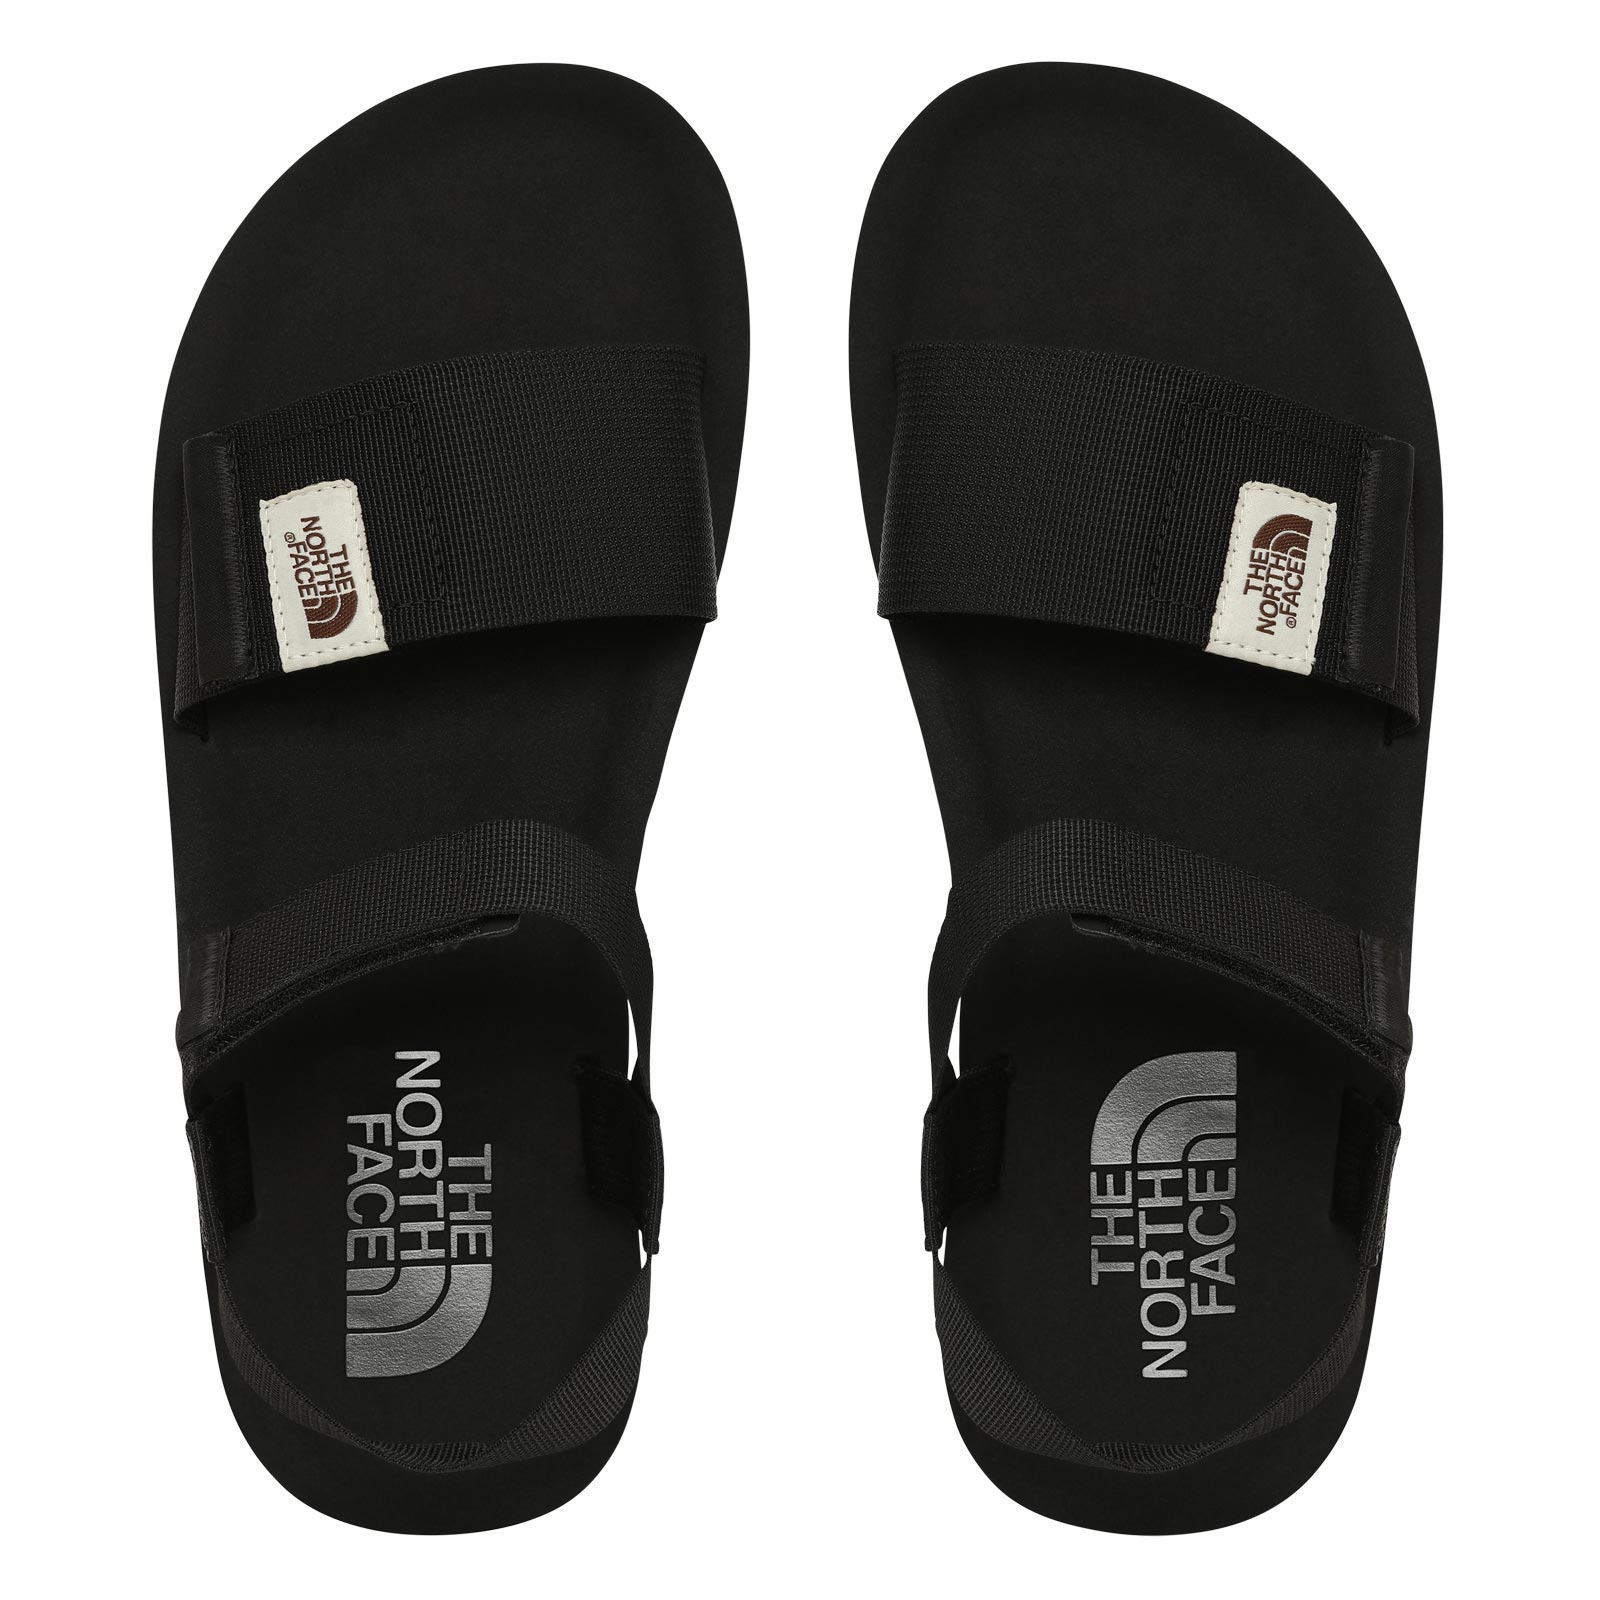 THE NORTH FACE SKEENA WOMENS SANDALS